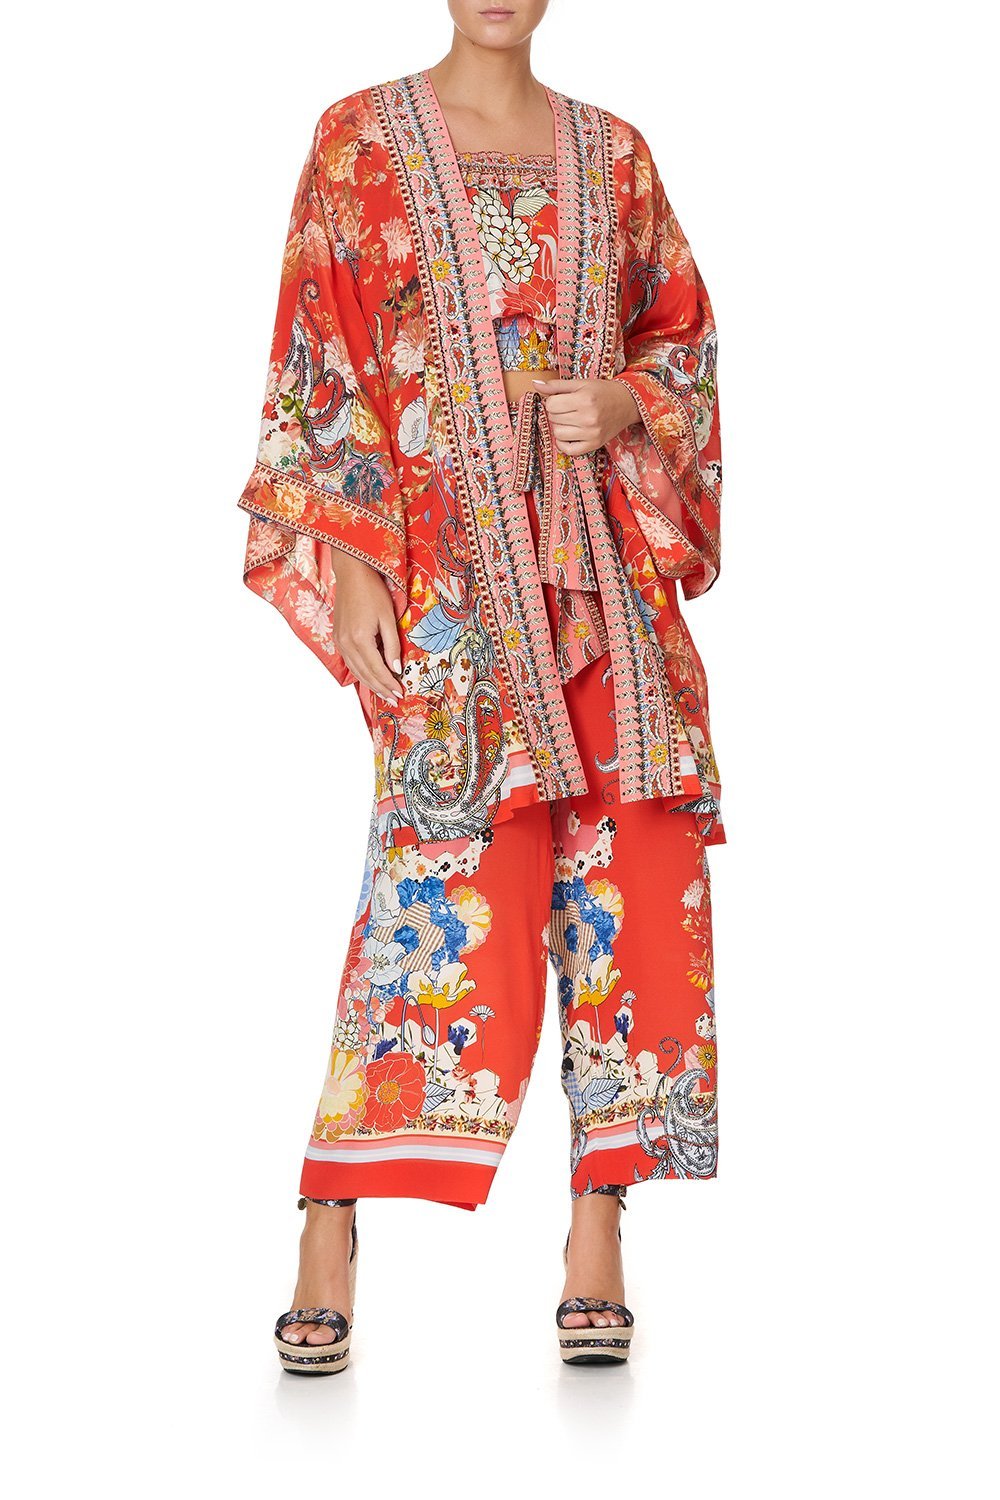 KIMONO WITH TIE BELT PAISLEY IN PATCHES